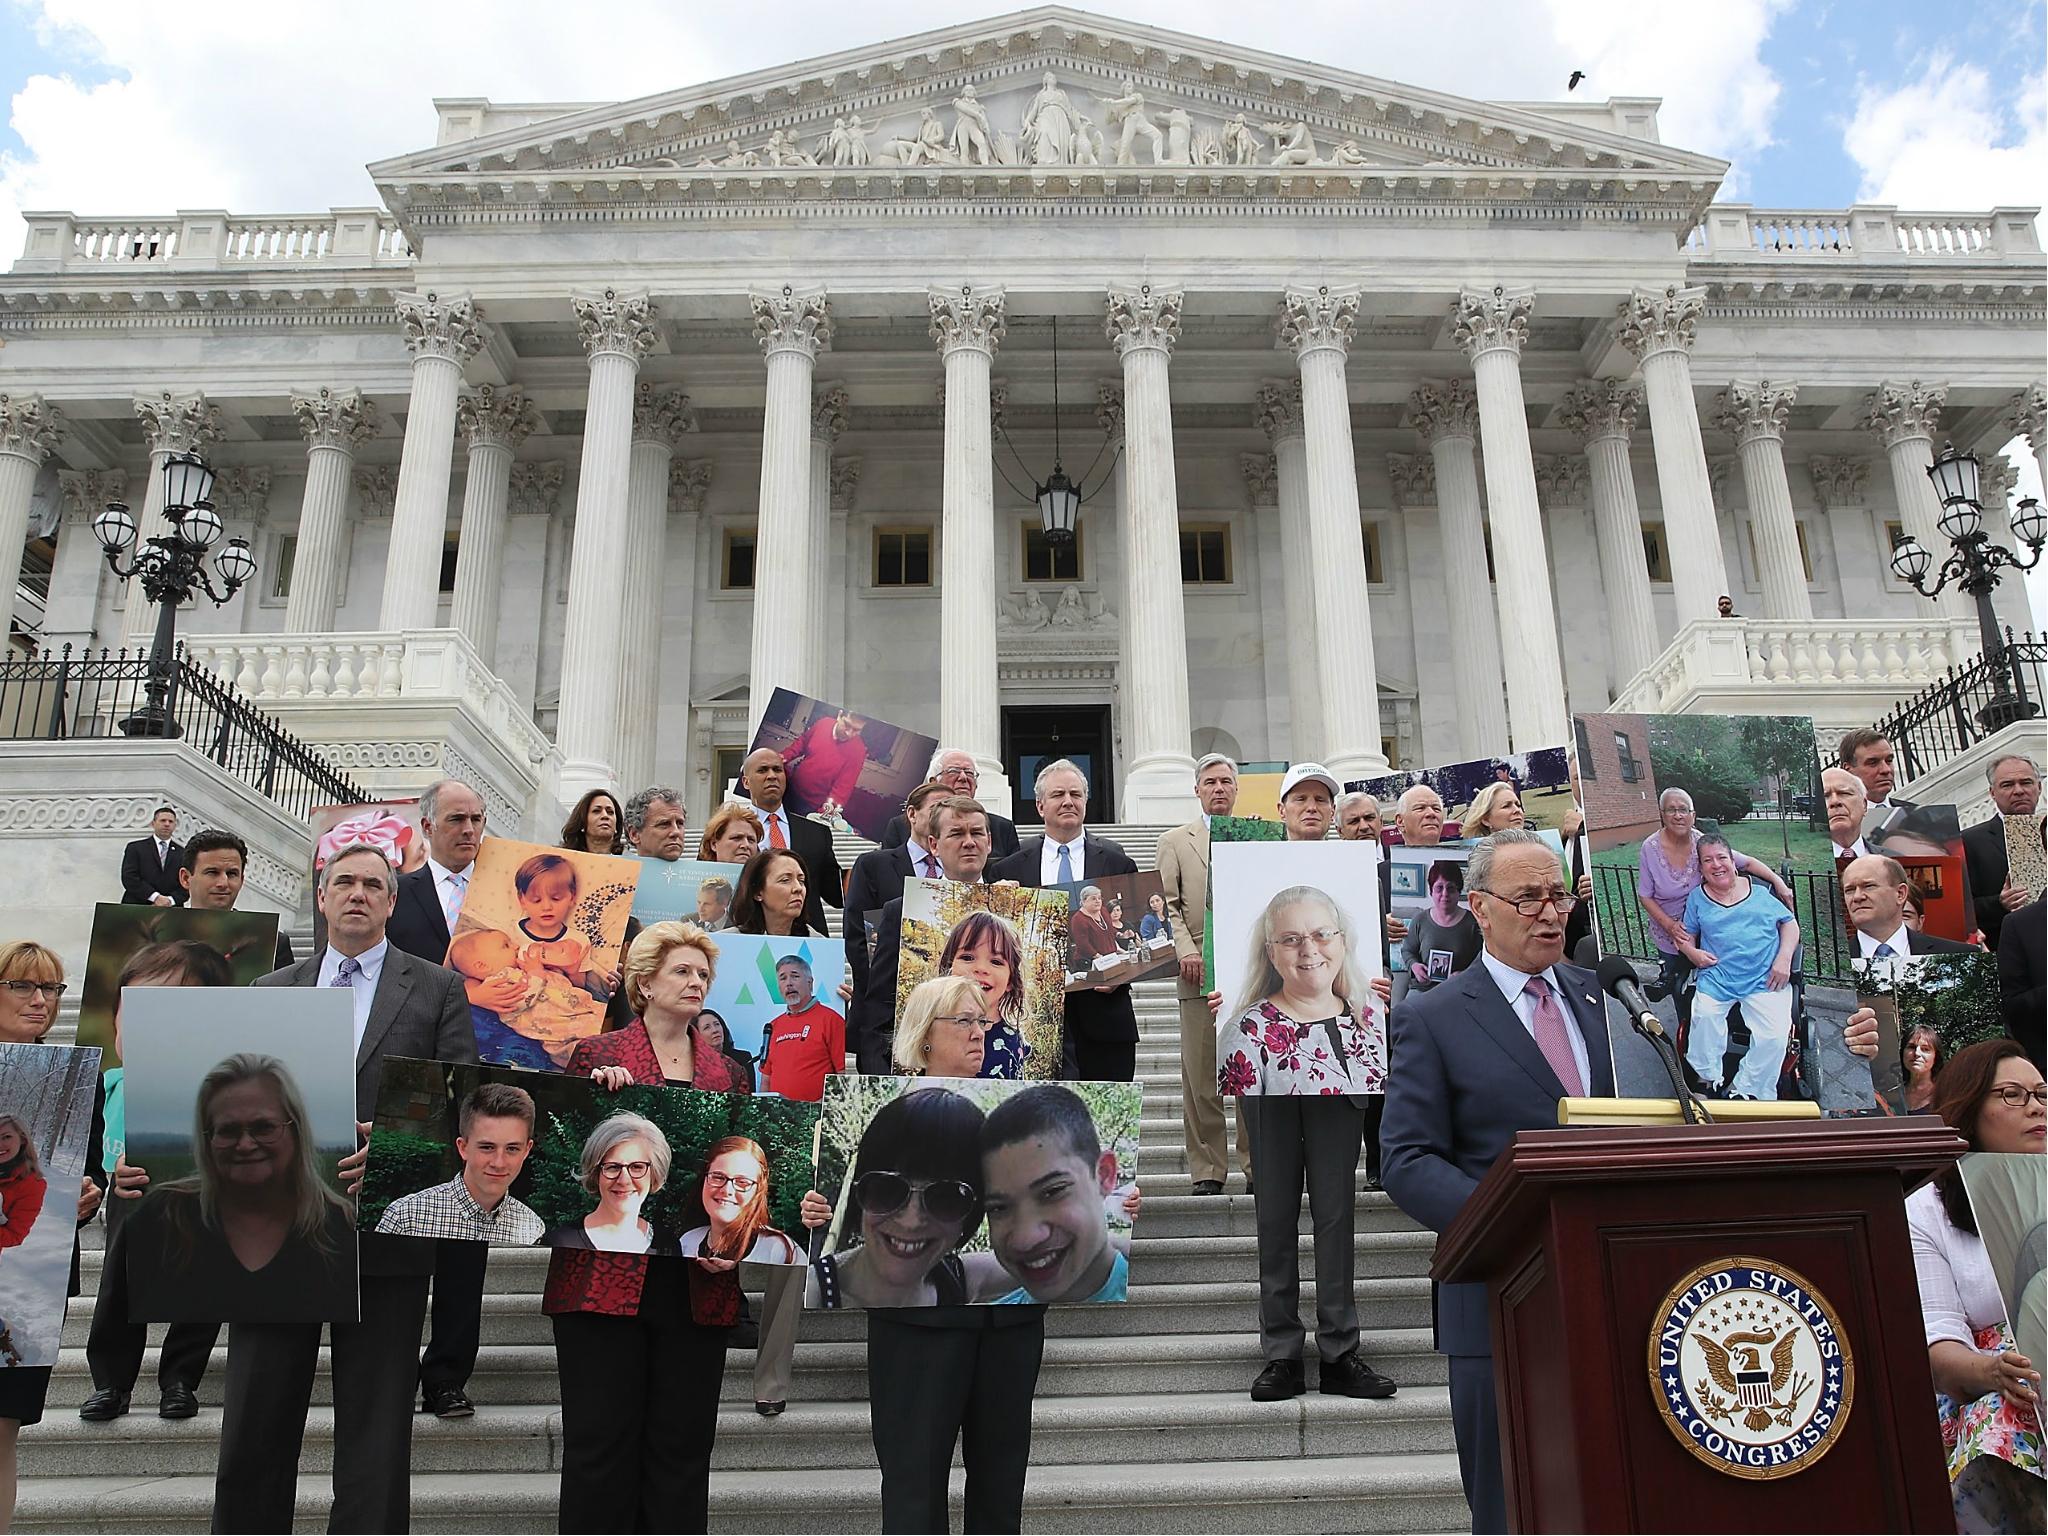 Senate Minority Leader Chuck Schumer speaks while flanked by Senate Democrats holding photos of people who would lose their health coverage under the Senate Republicans healthcare bill during a press conference at the US Capitol on 27 June 2017